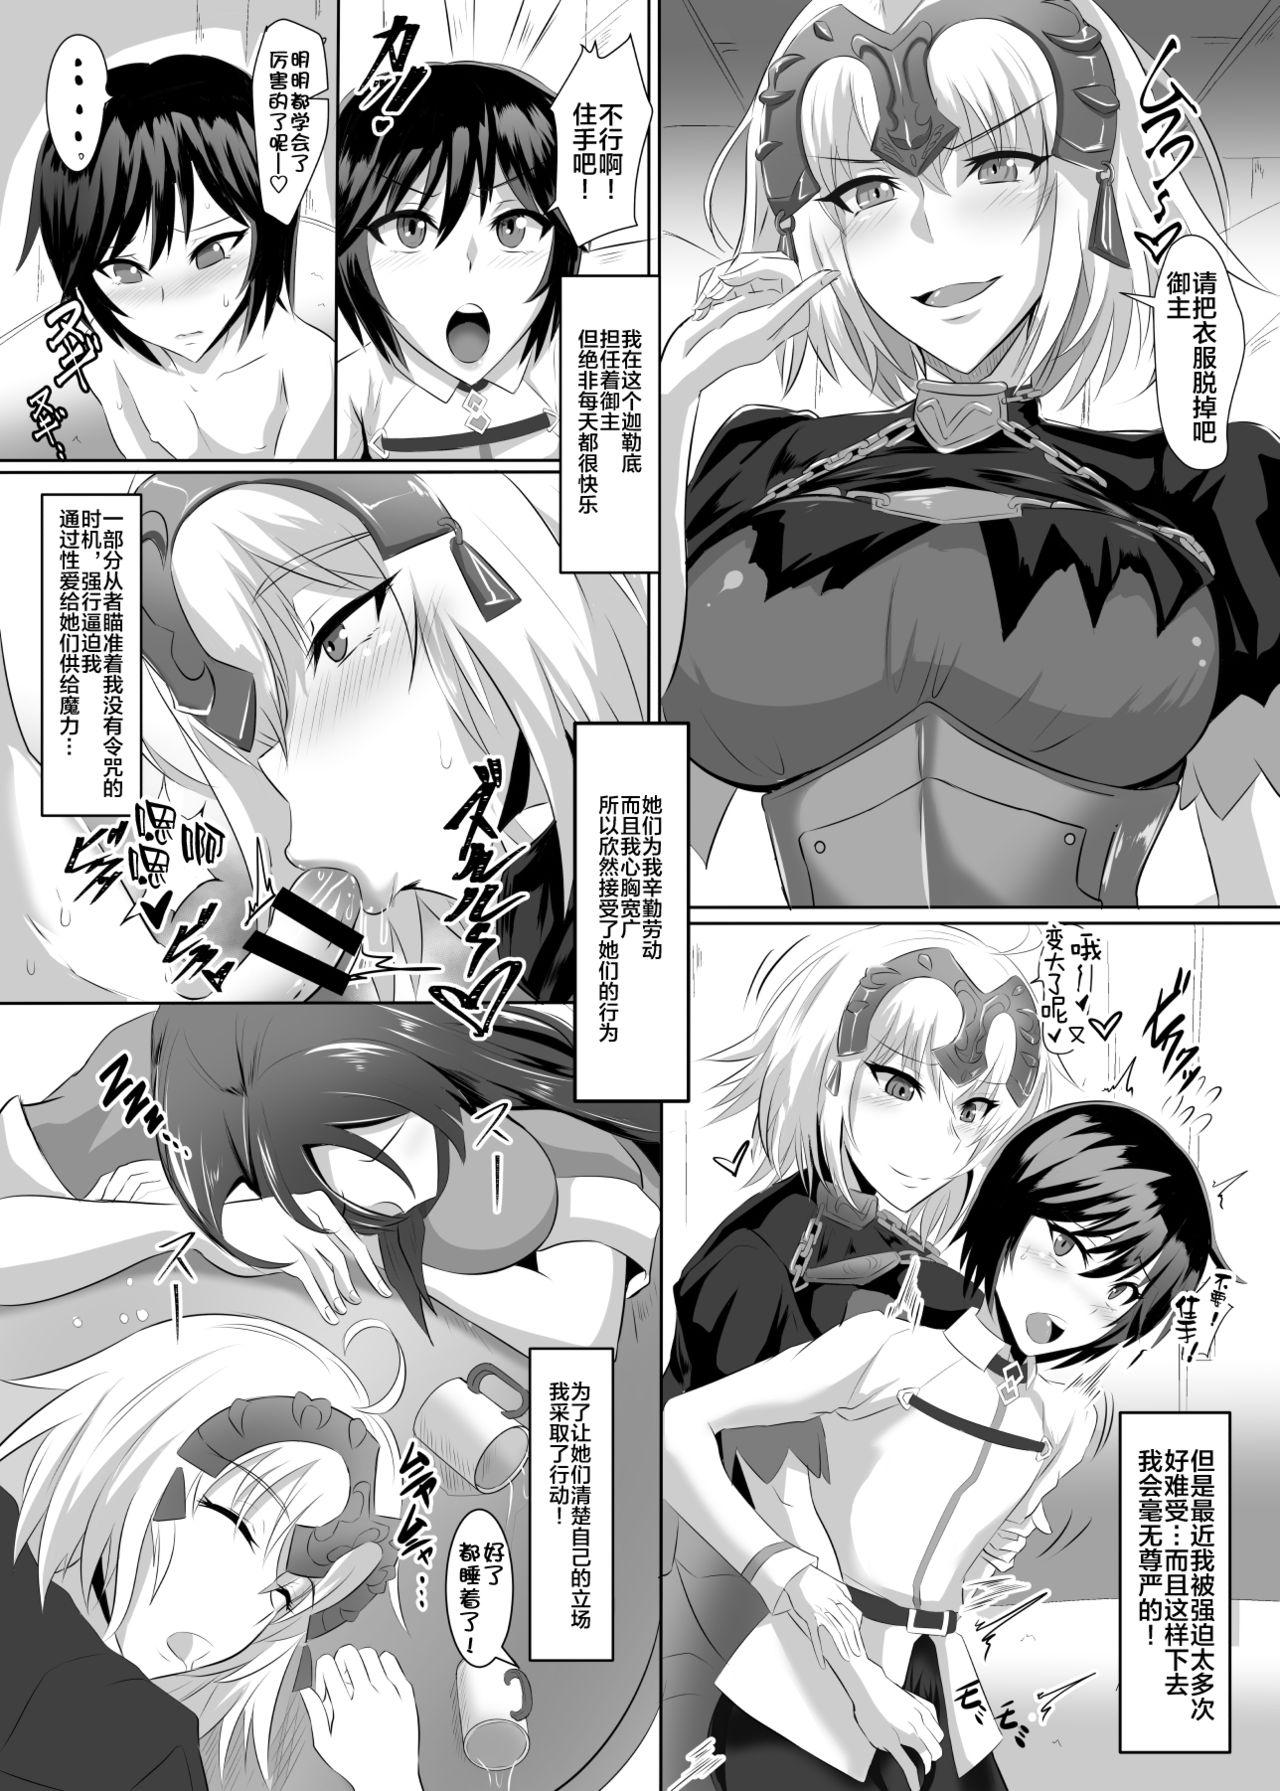 Bigtits Gehenna 7 - Fate grand order Action - Page 4